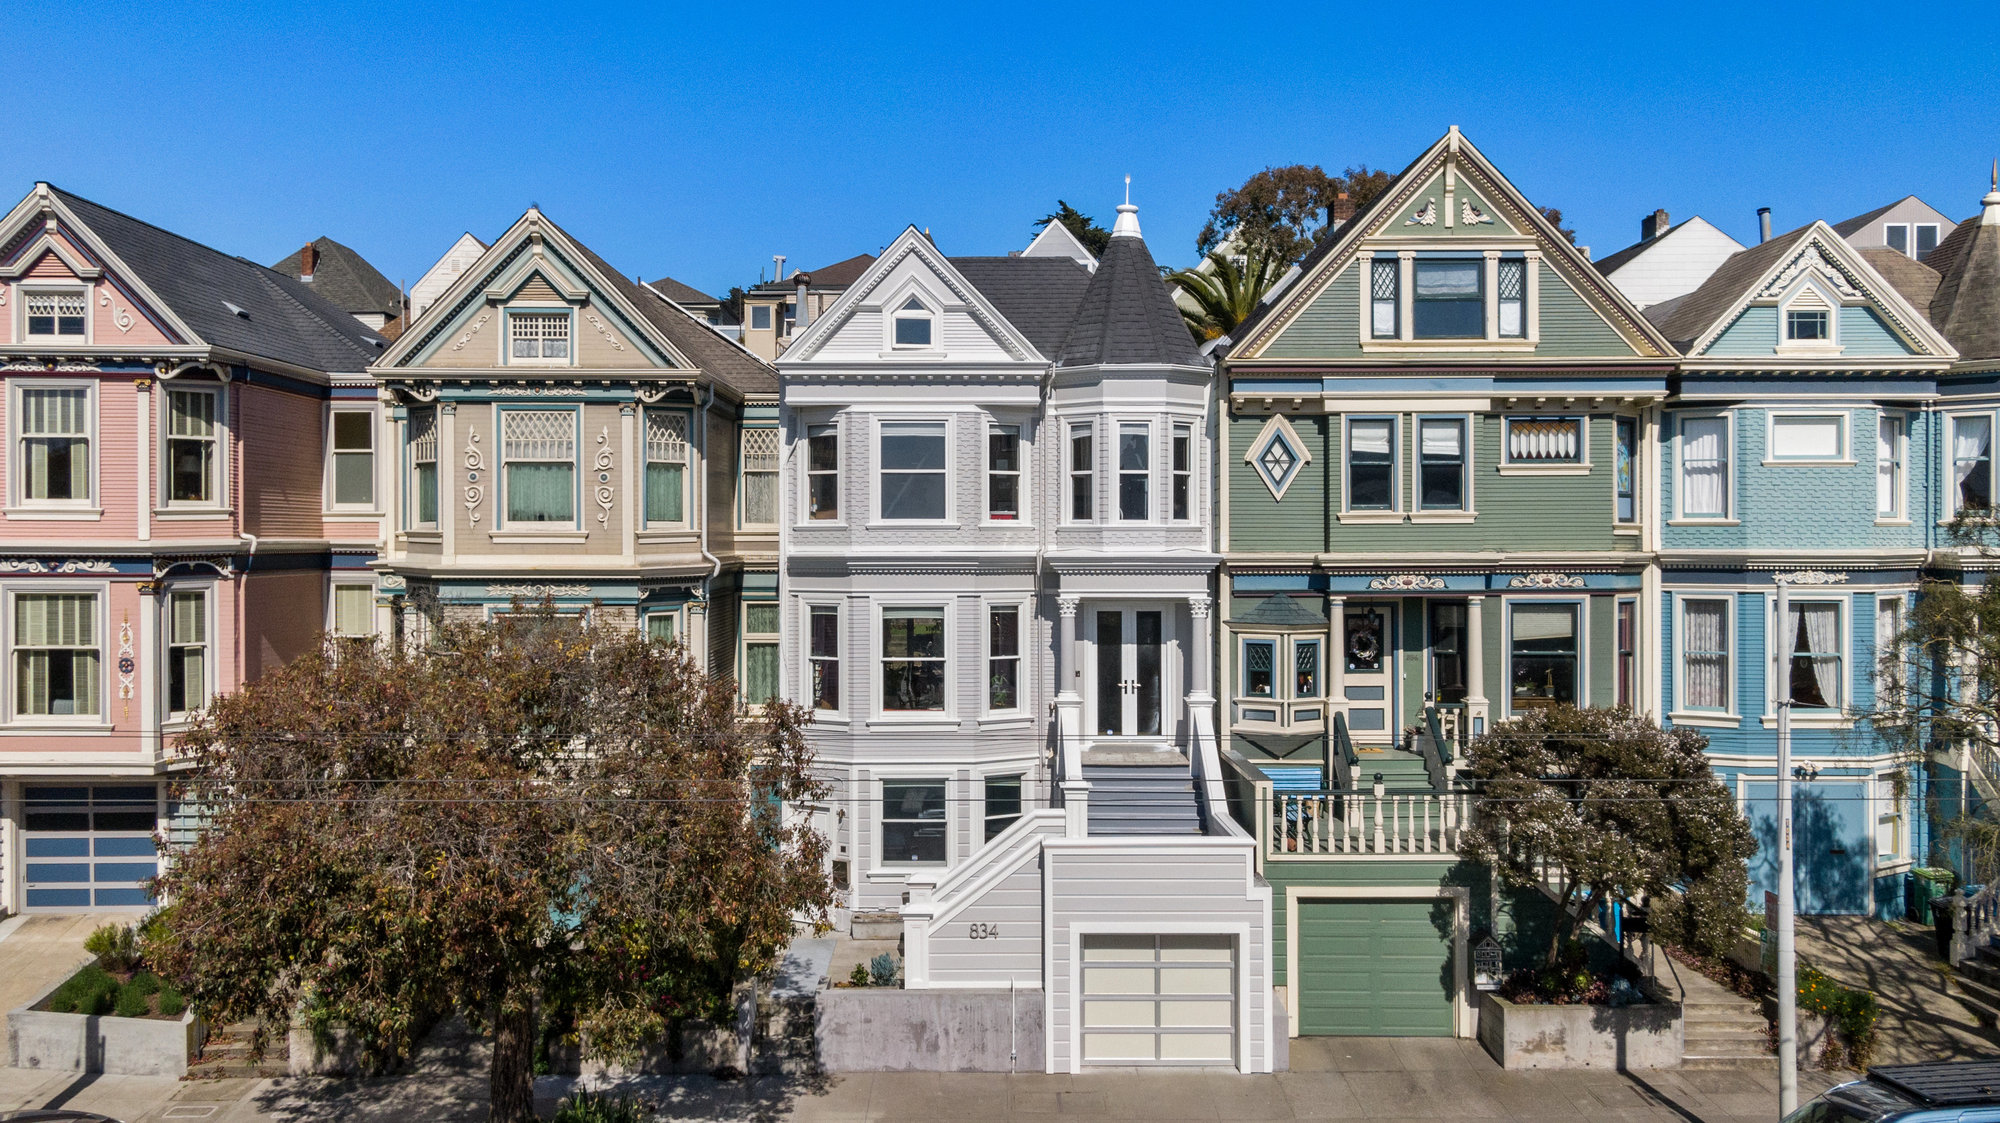 View of a large single-family Victorian home in San Francisco's Cole Valley neighborhood